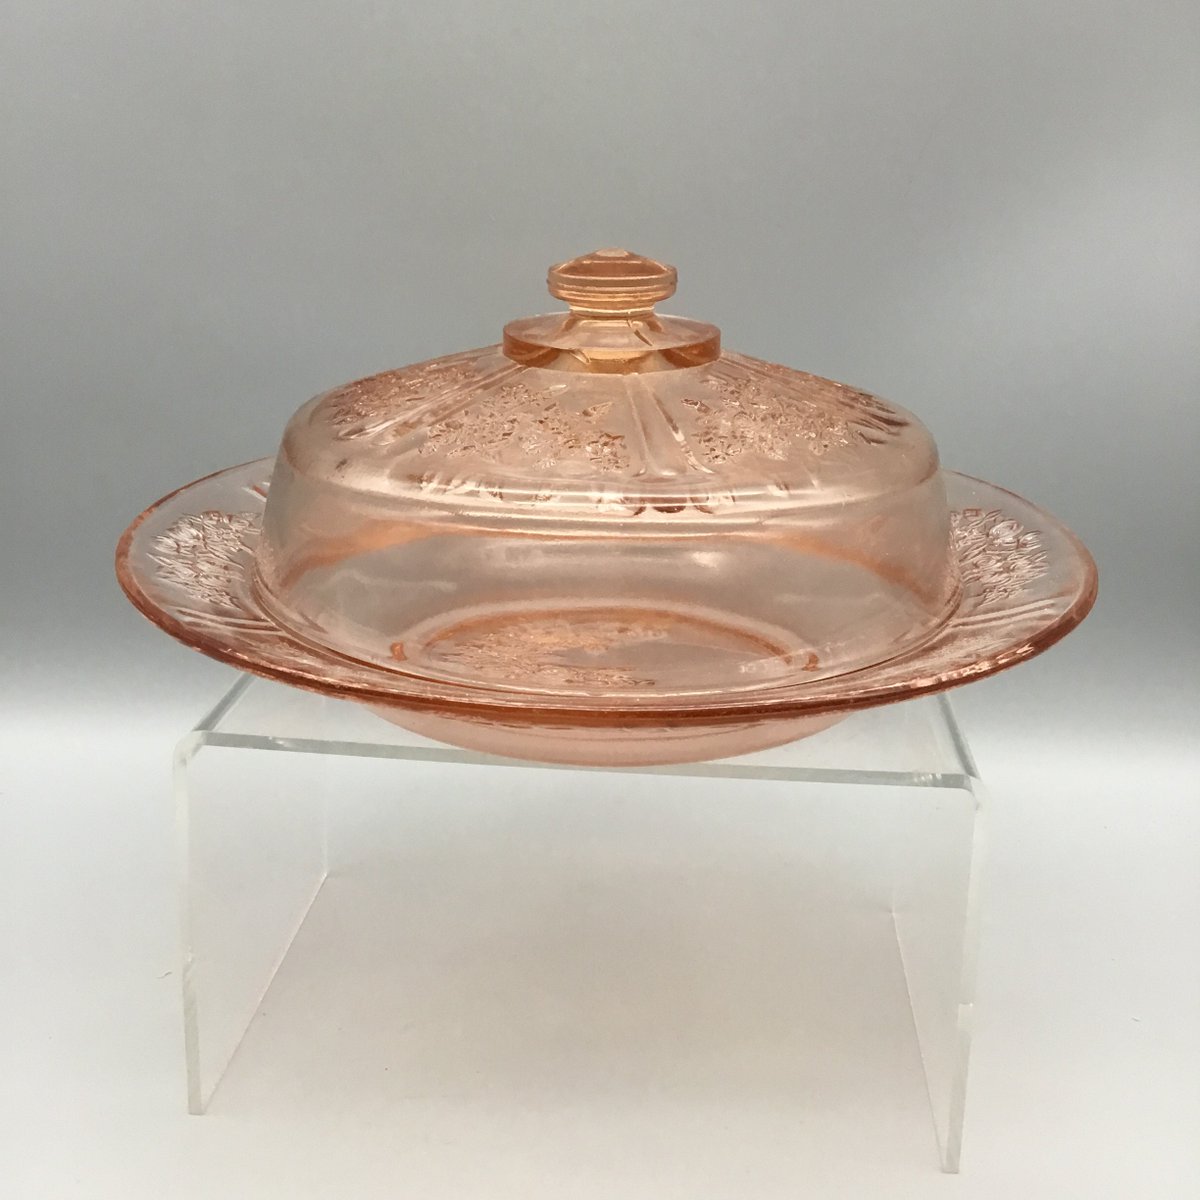 Excited to share the latest addition to my #etsy shop: Federal Pink Depression Glass Sharon Cabbage Rose Round Covered Butter Dish etsy.me/3W0Ywp4 #pink #federalglass #pinkdepression #cabbagerose #round #covered #butterdish #candy #collectableglass